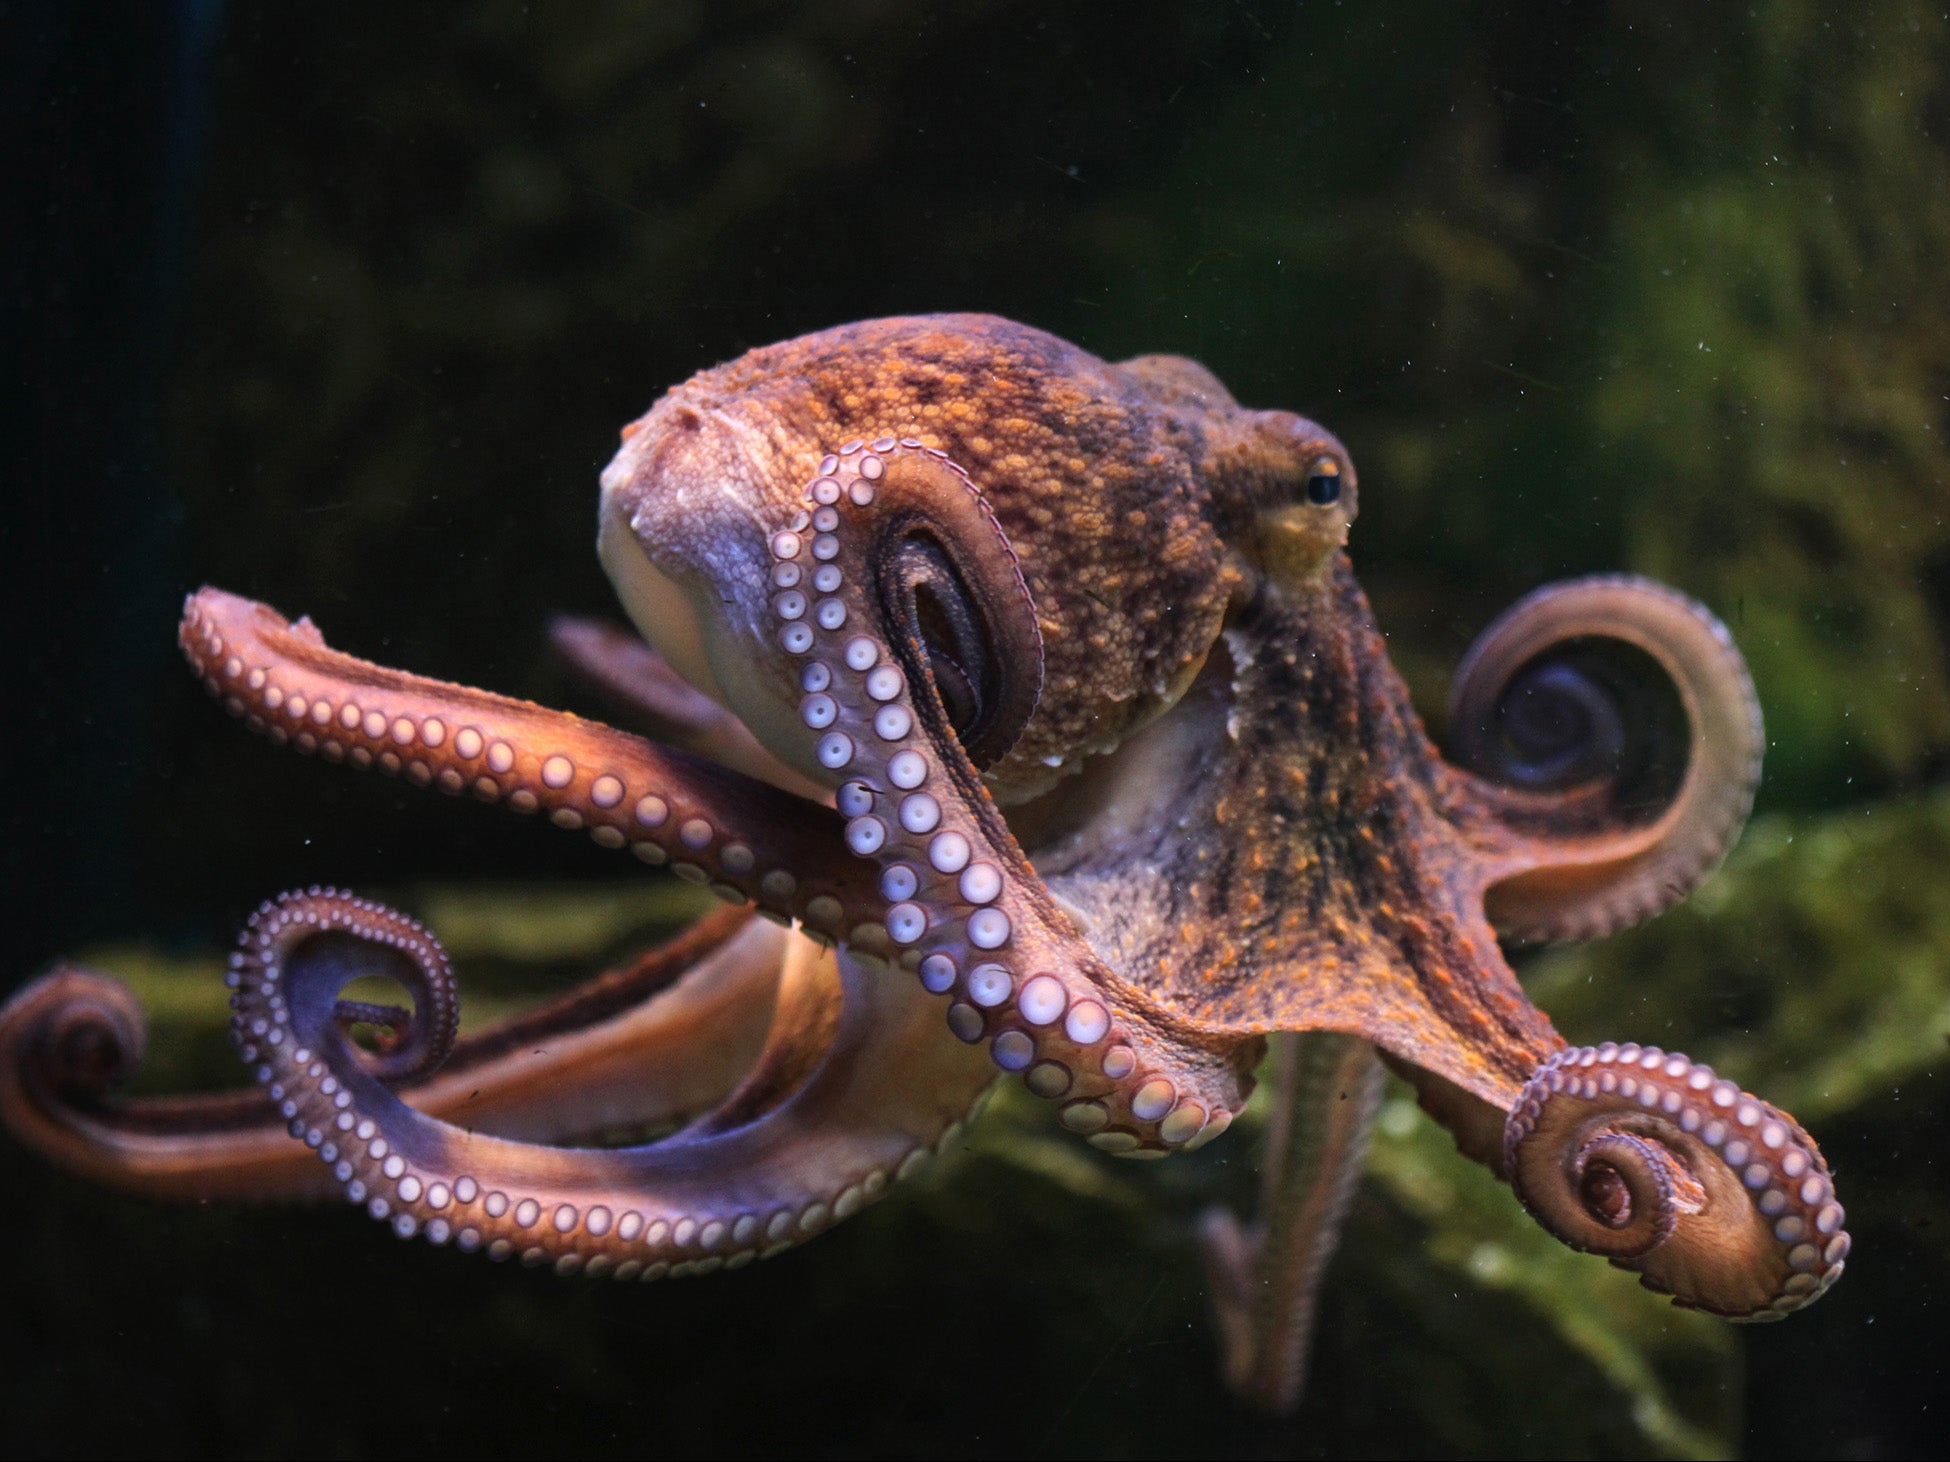 Spain to build world's first octopus farm, prompting concerns over ethics |  The Independent